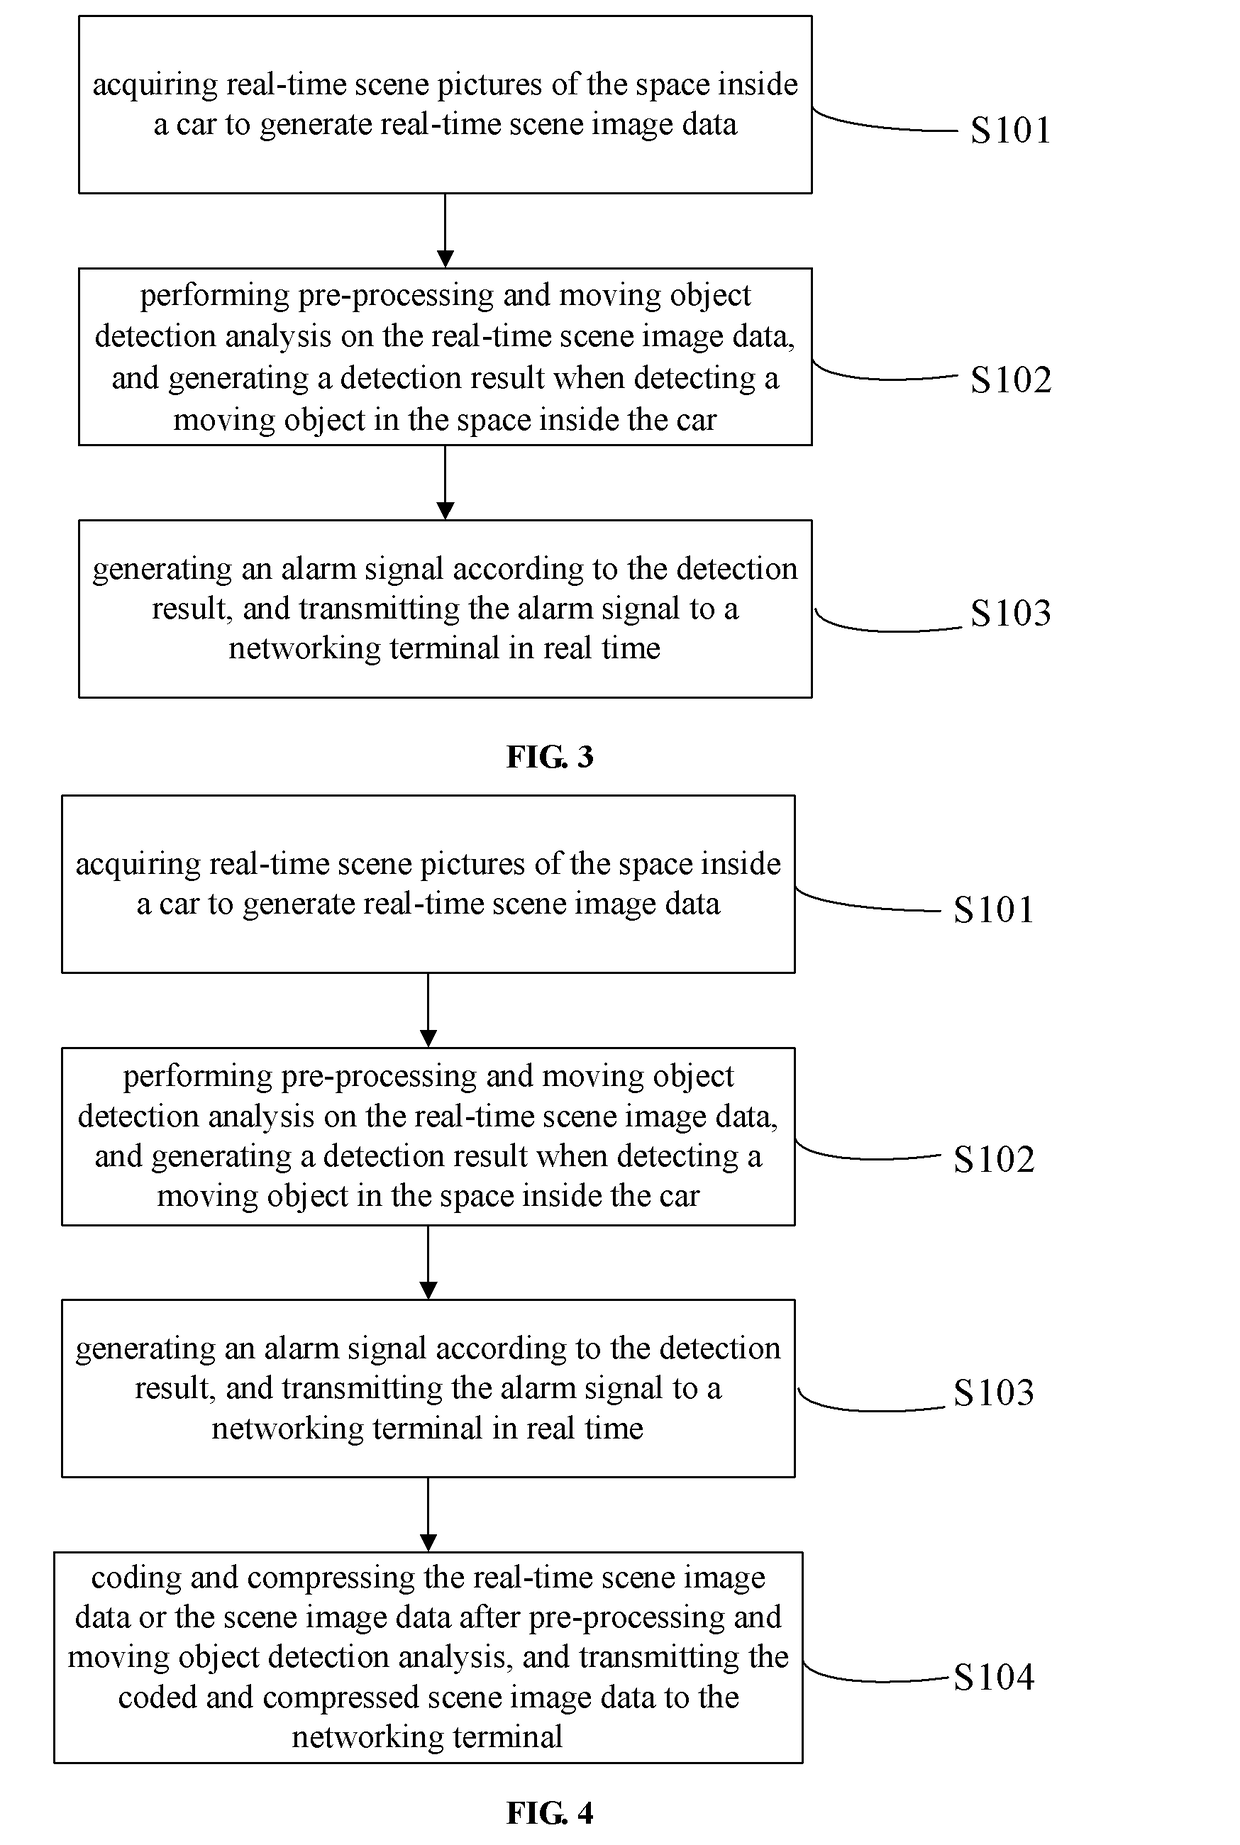 Image-based remote observation and alarm device and method for in-car moving objects